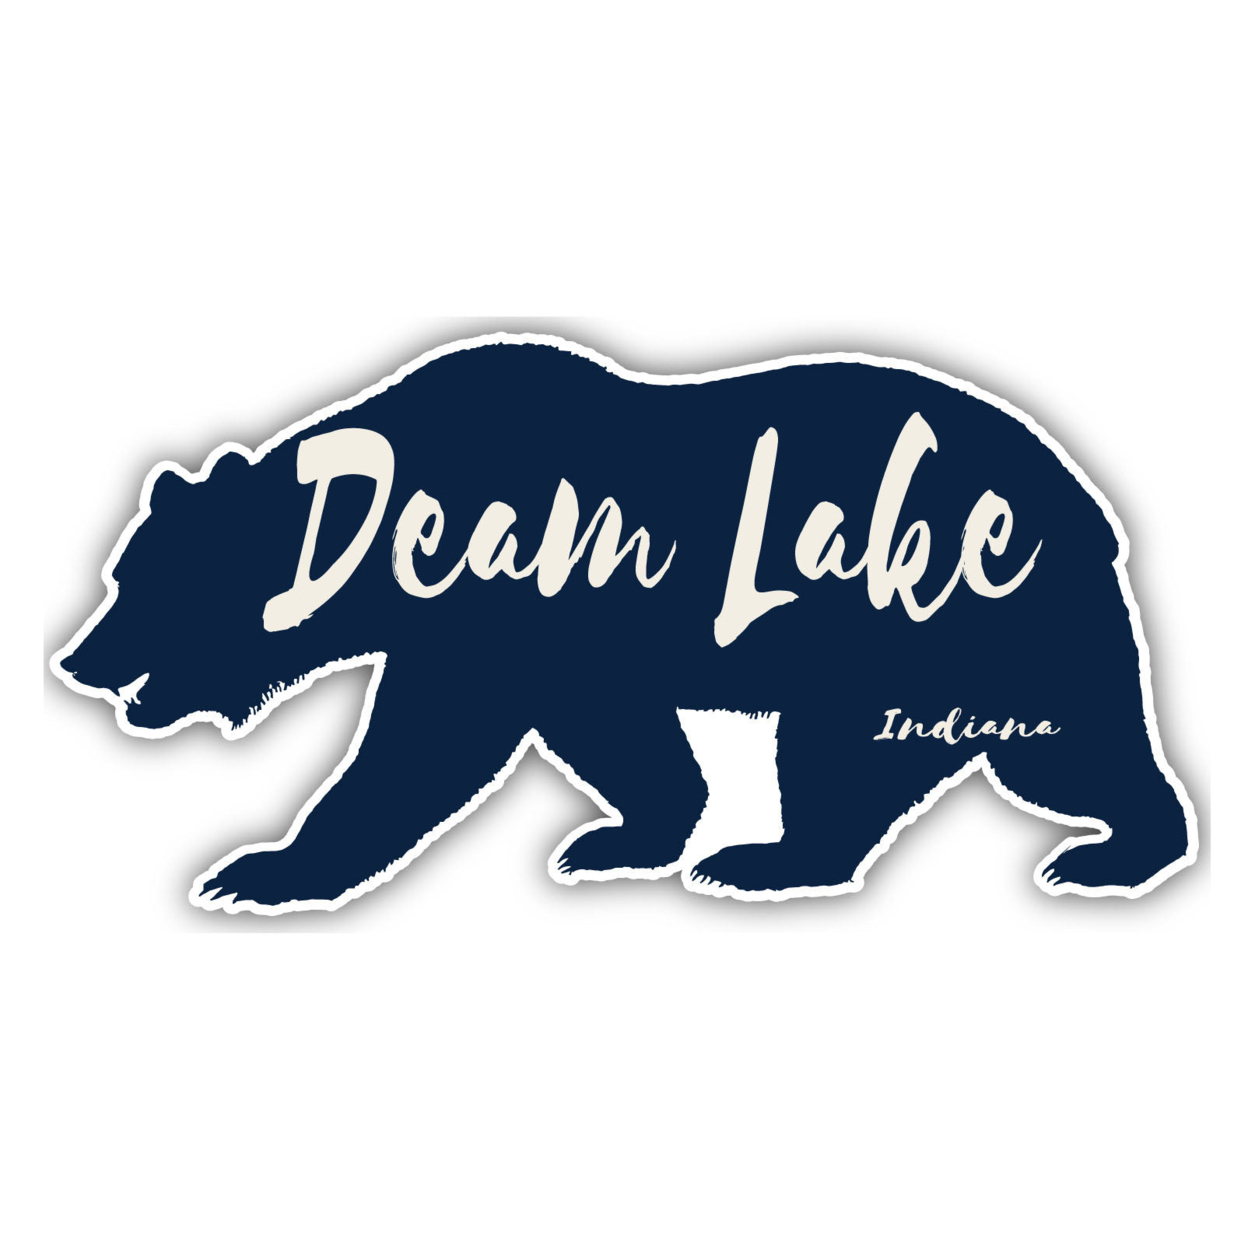 Deam Lake Indiana Souvenir Decorative Stickers (Choose Theme And Size) - Single Unit, 4-Inch, Great Outdoors